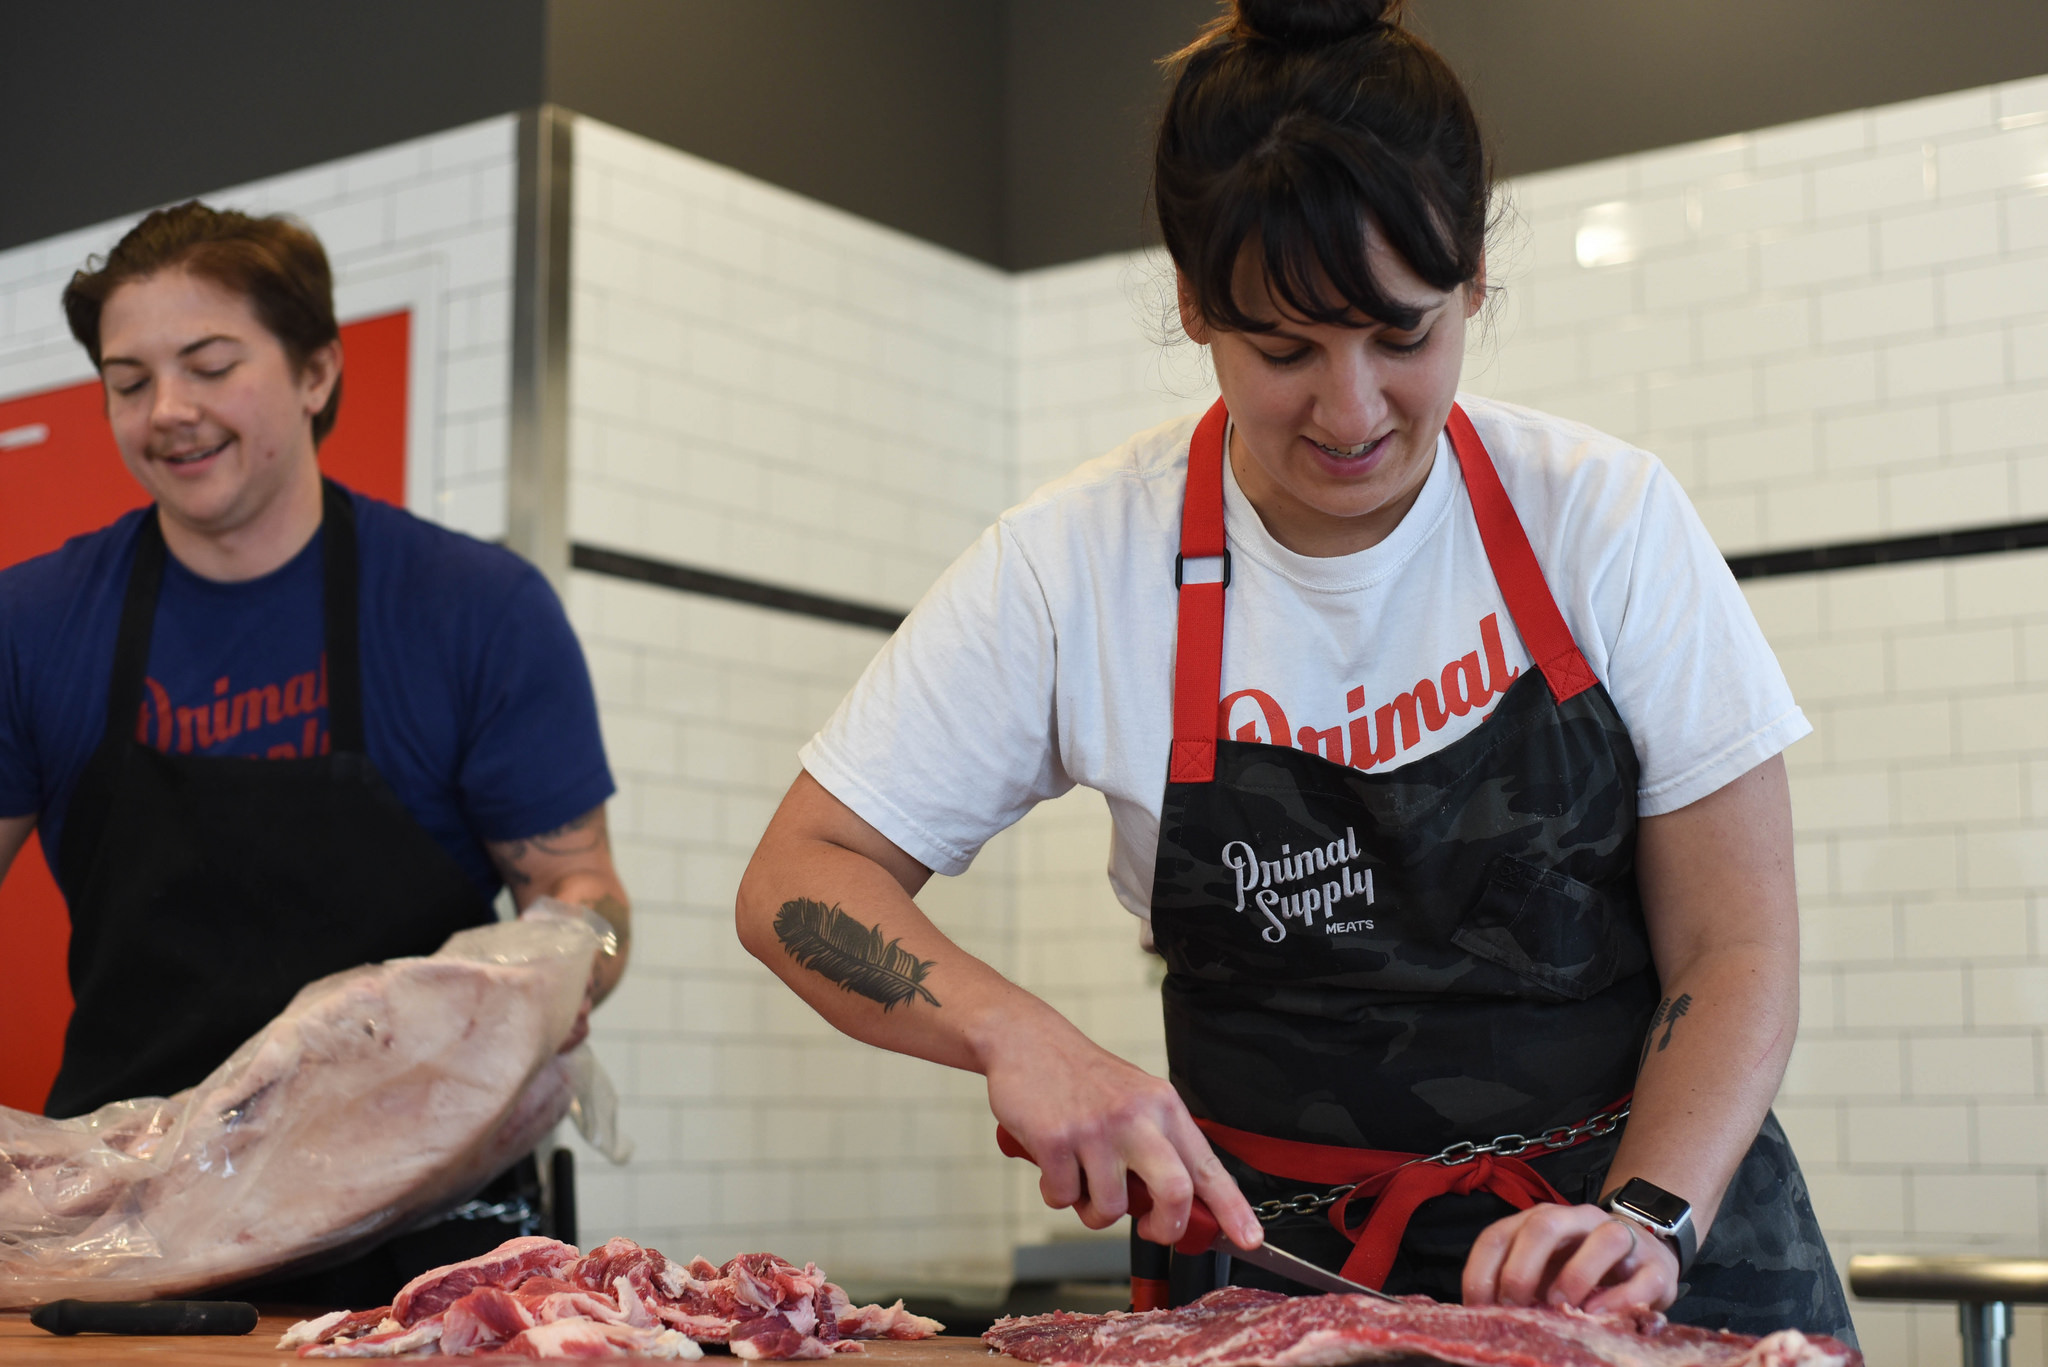 Heather Thomason of Primal Supply Meats preparing meat in her South Philadelphia butcher shop.